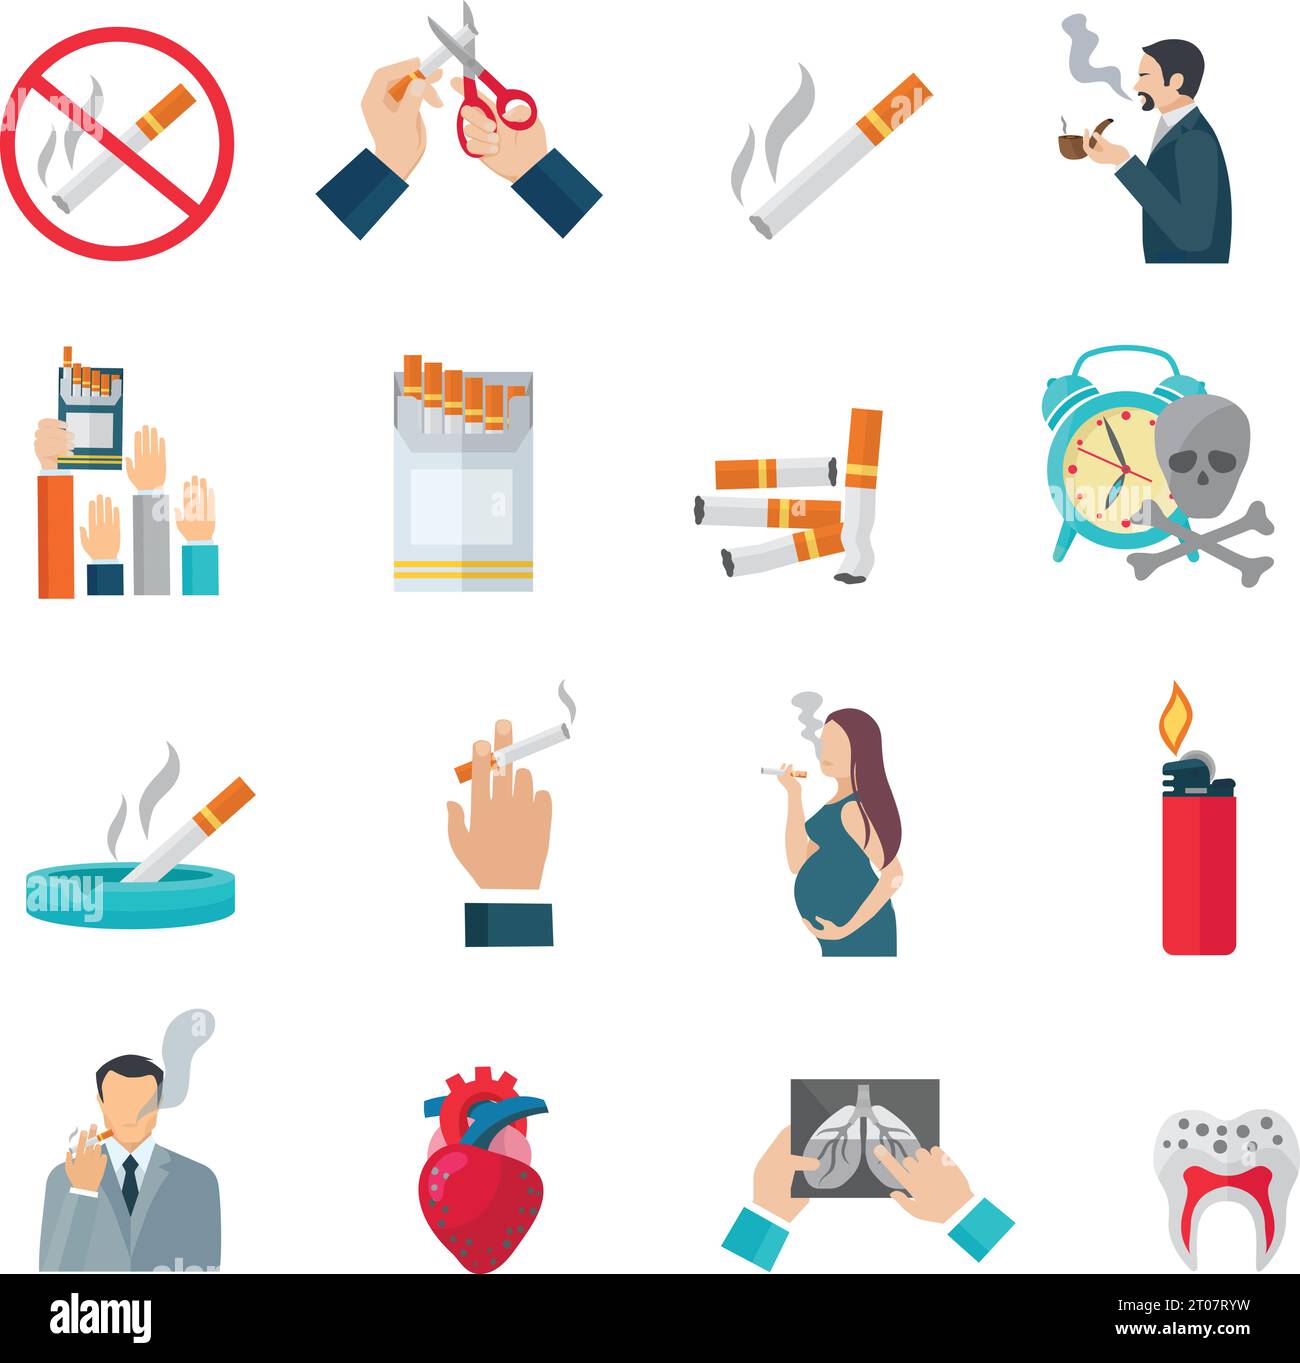 Smoking flat icons set with cigarette danger and hazards symbols isolated vector illustration Stock Vector